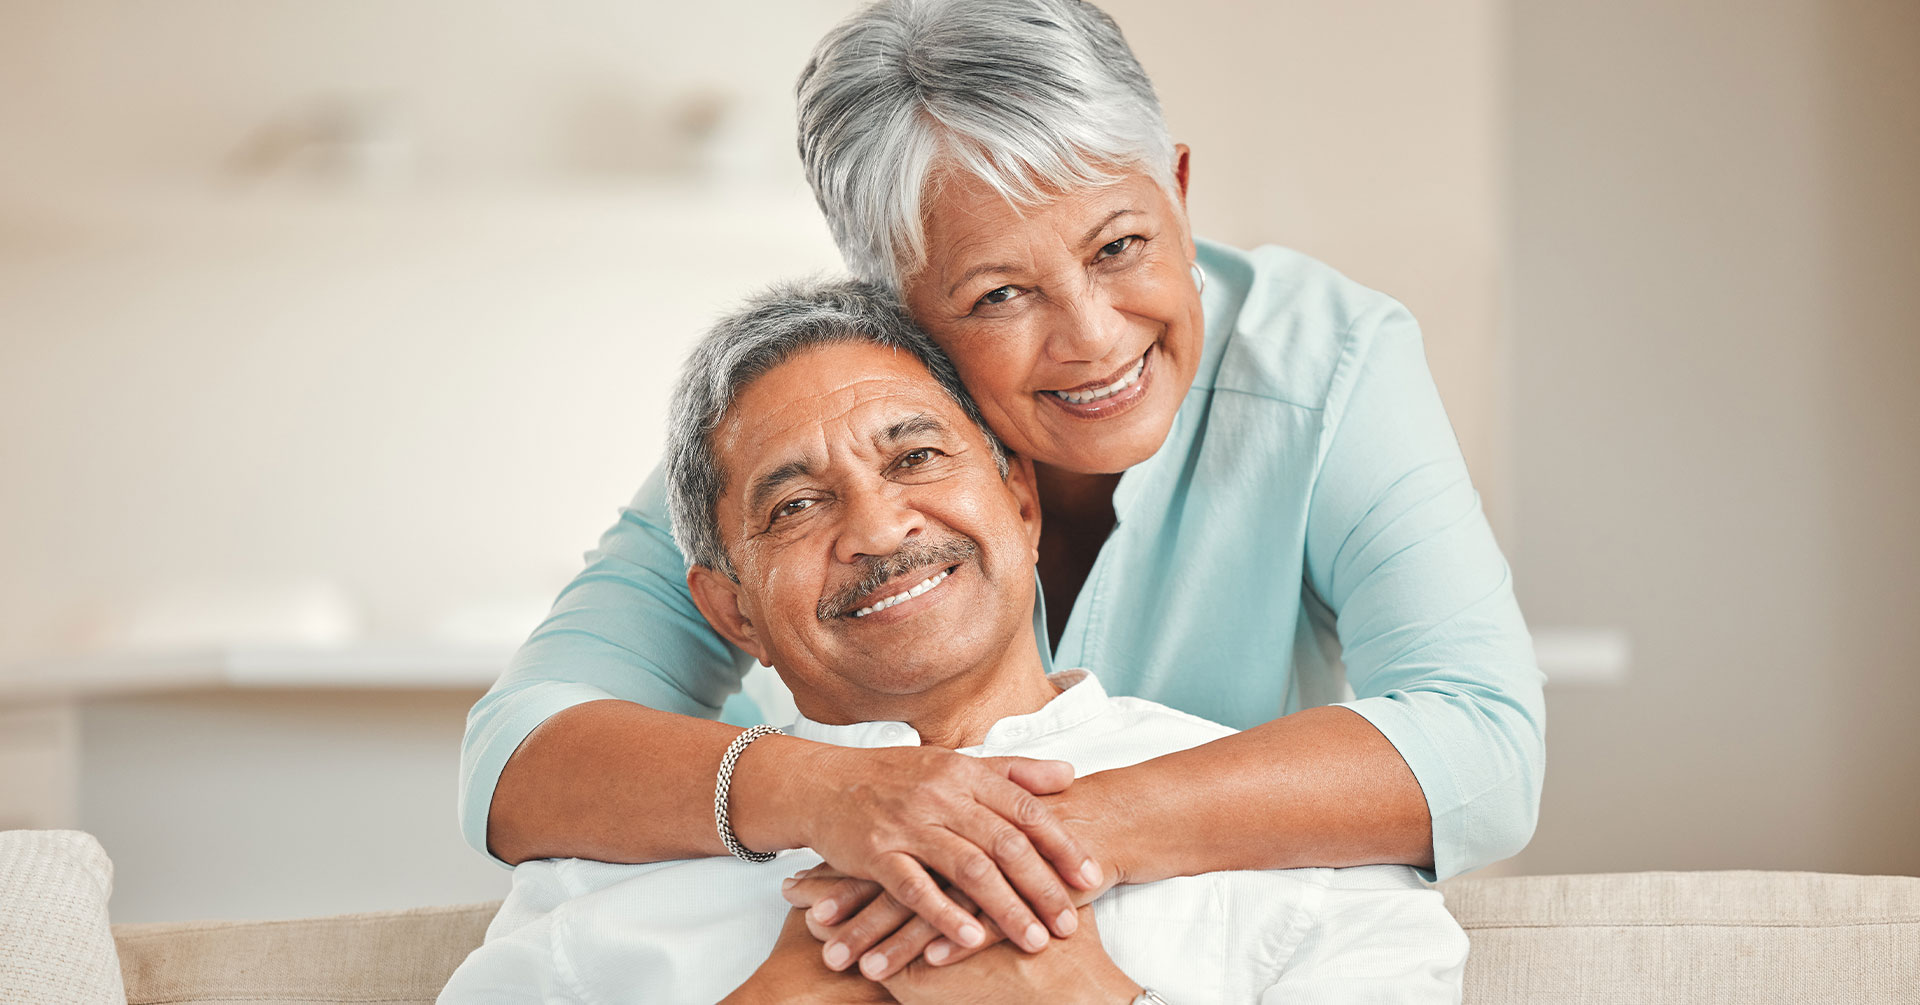 An elderly couple embracing and smiling in a cozy living room setting.